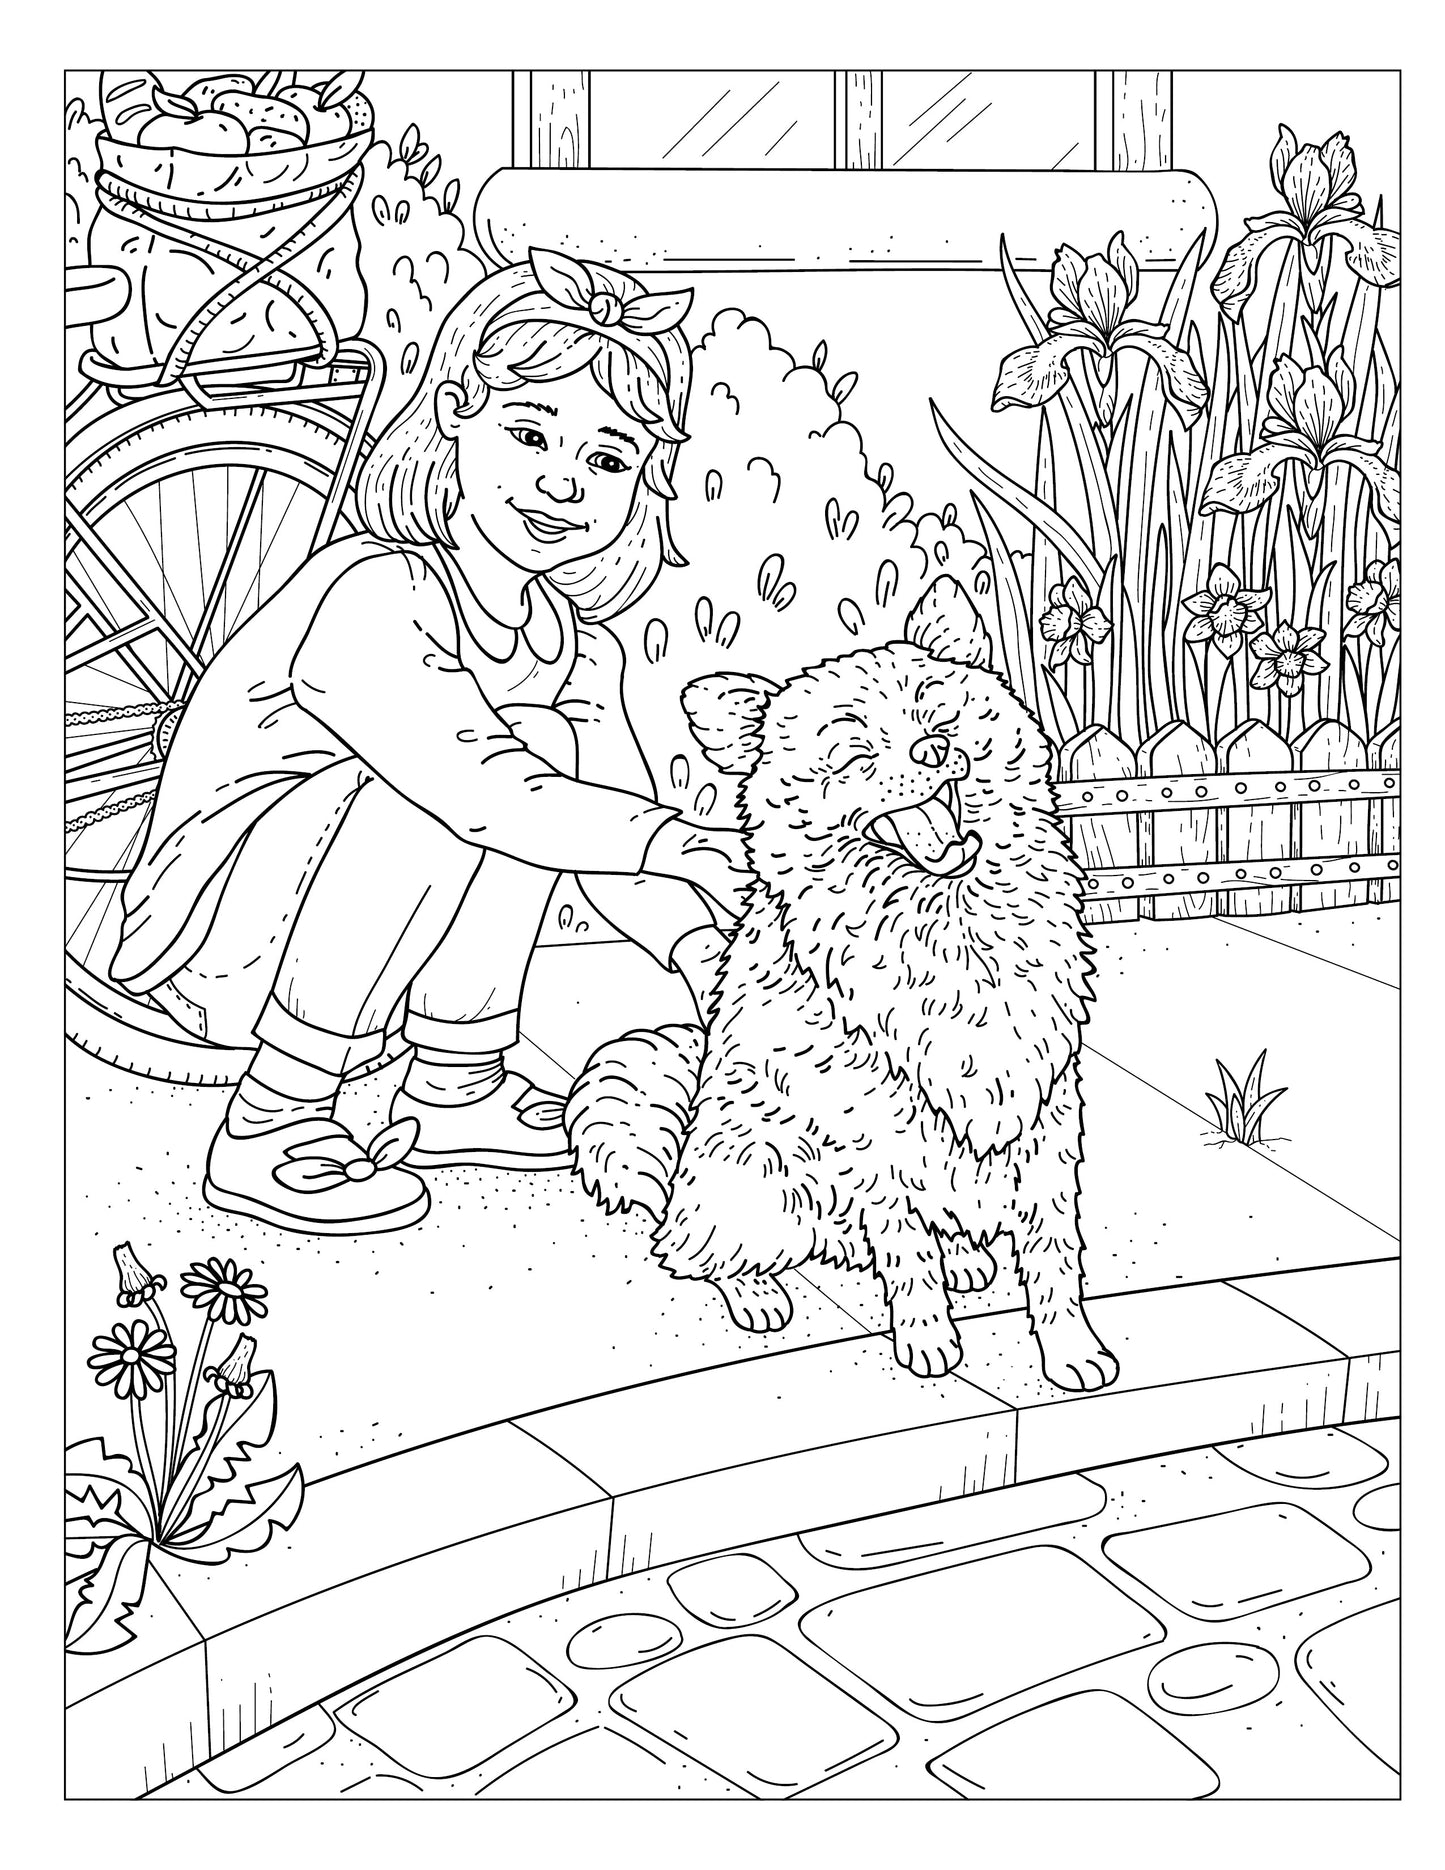 Single Coloring Book Page - Winston & Whiskers, Adventure One - Time to Go Home